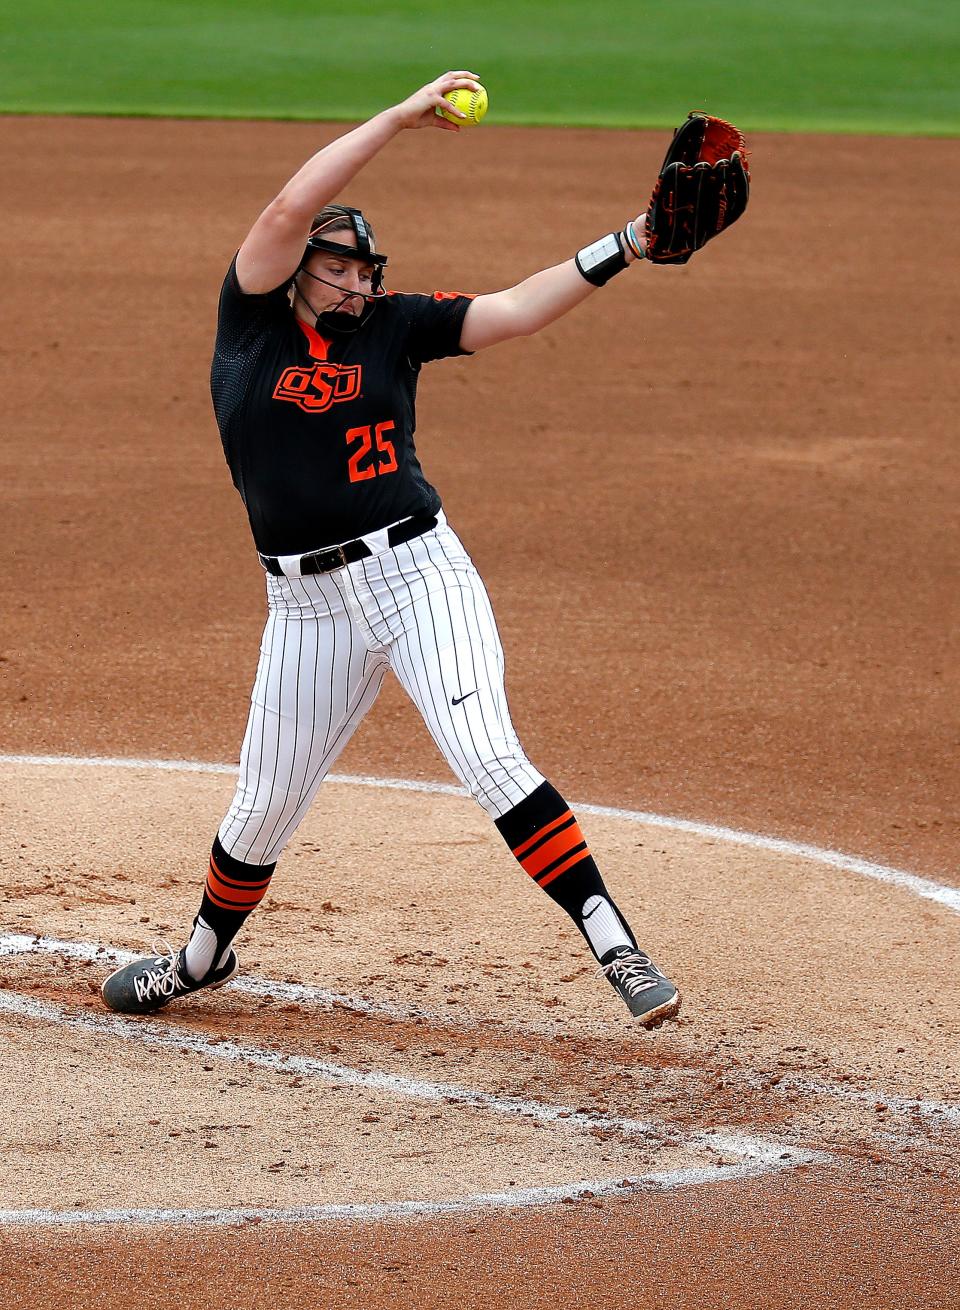 Oklahoma State's Carrie Eberle (25) throws a pitch in the first inning during the NCAA softball regional game between the Oklahoma State Cowgirls and the Mississippi State Bulldogs at Cowgirls Stadium in Stillwater, Okla., Sunday, May 23, 2021. OSU won 10-2.